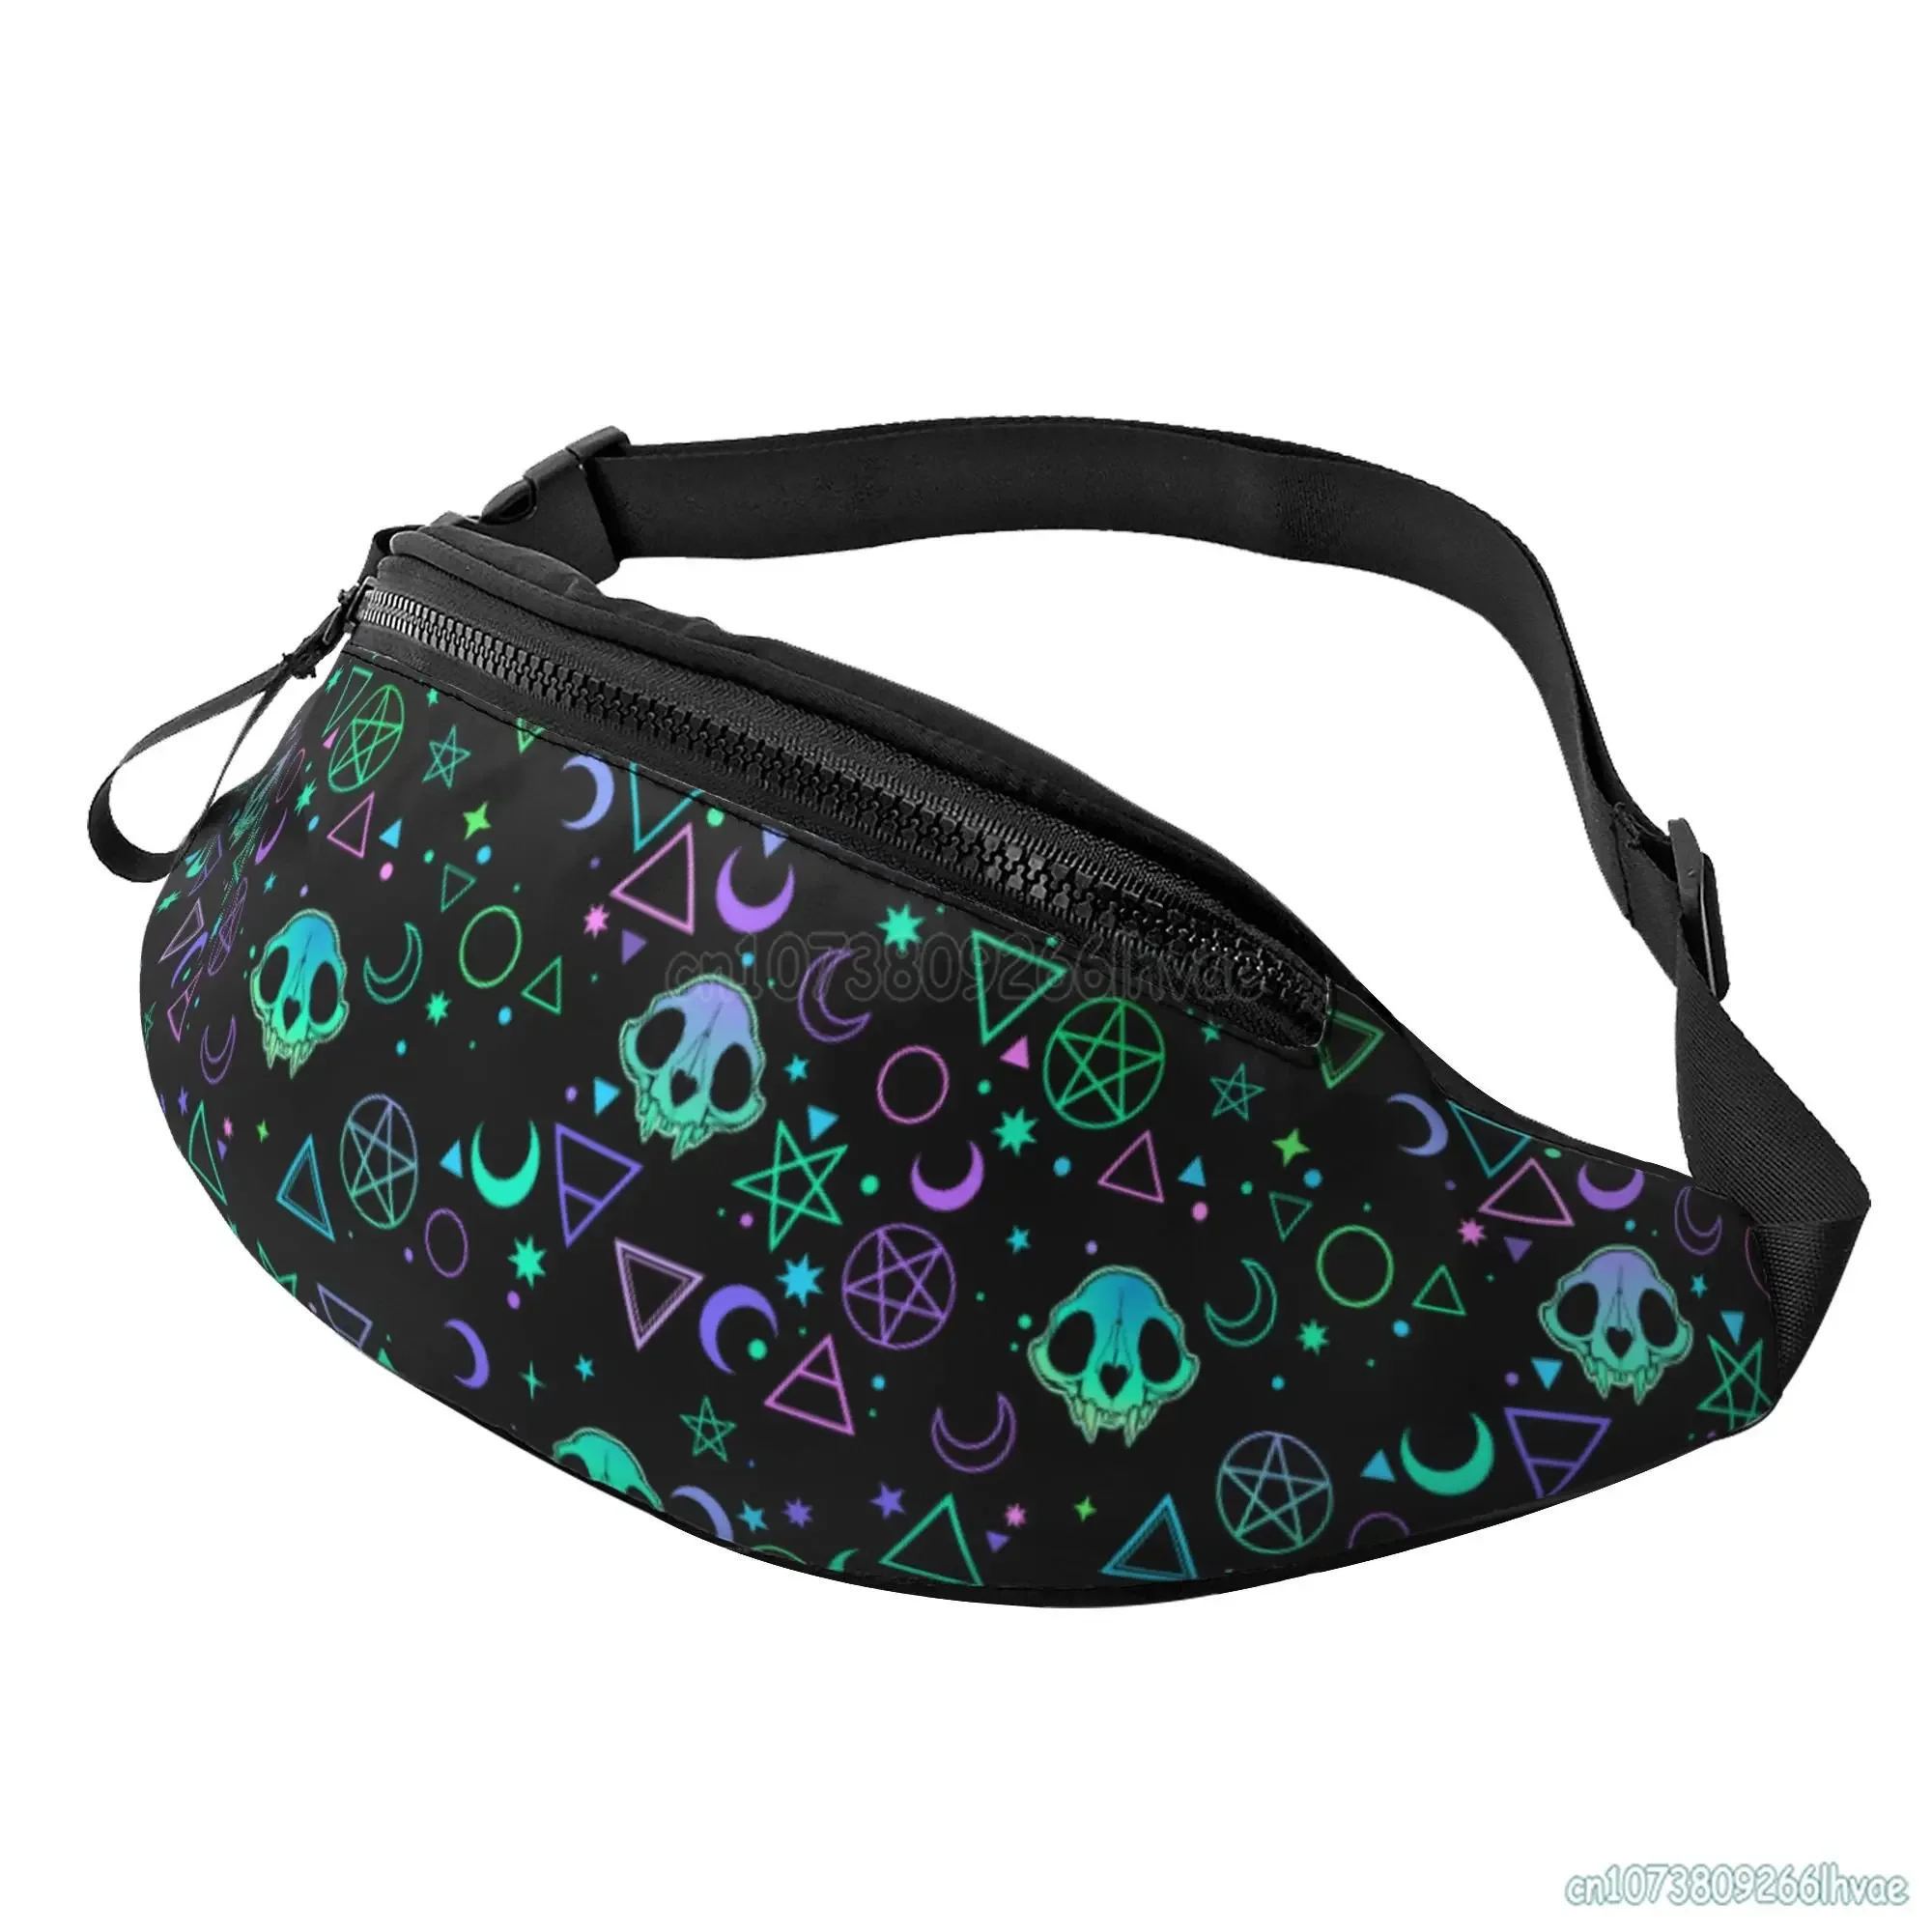 

Magic Symbols and Skulls Fanny Pack for Men Women Large Hiking Waist Bag Pack Carrying All Phones for Running Walking Traveling